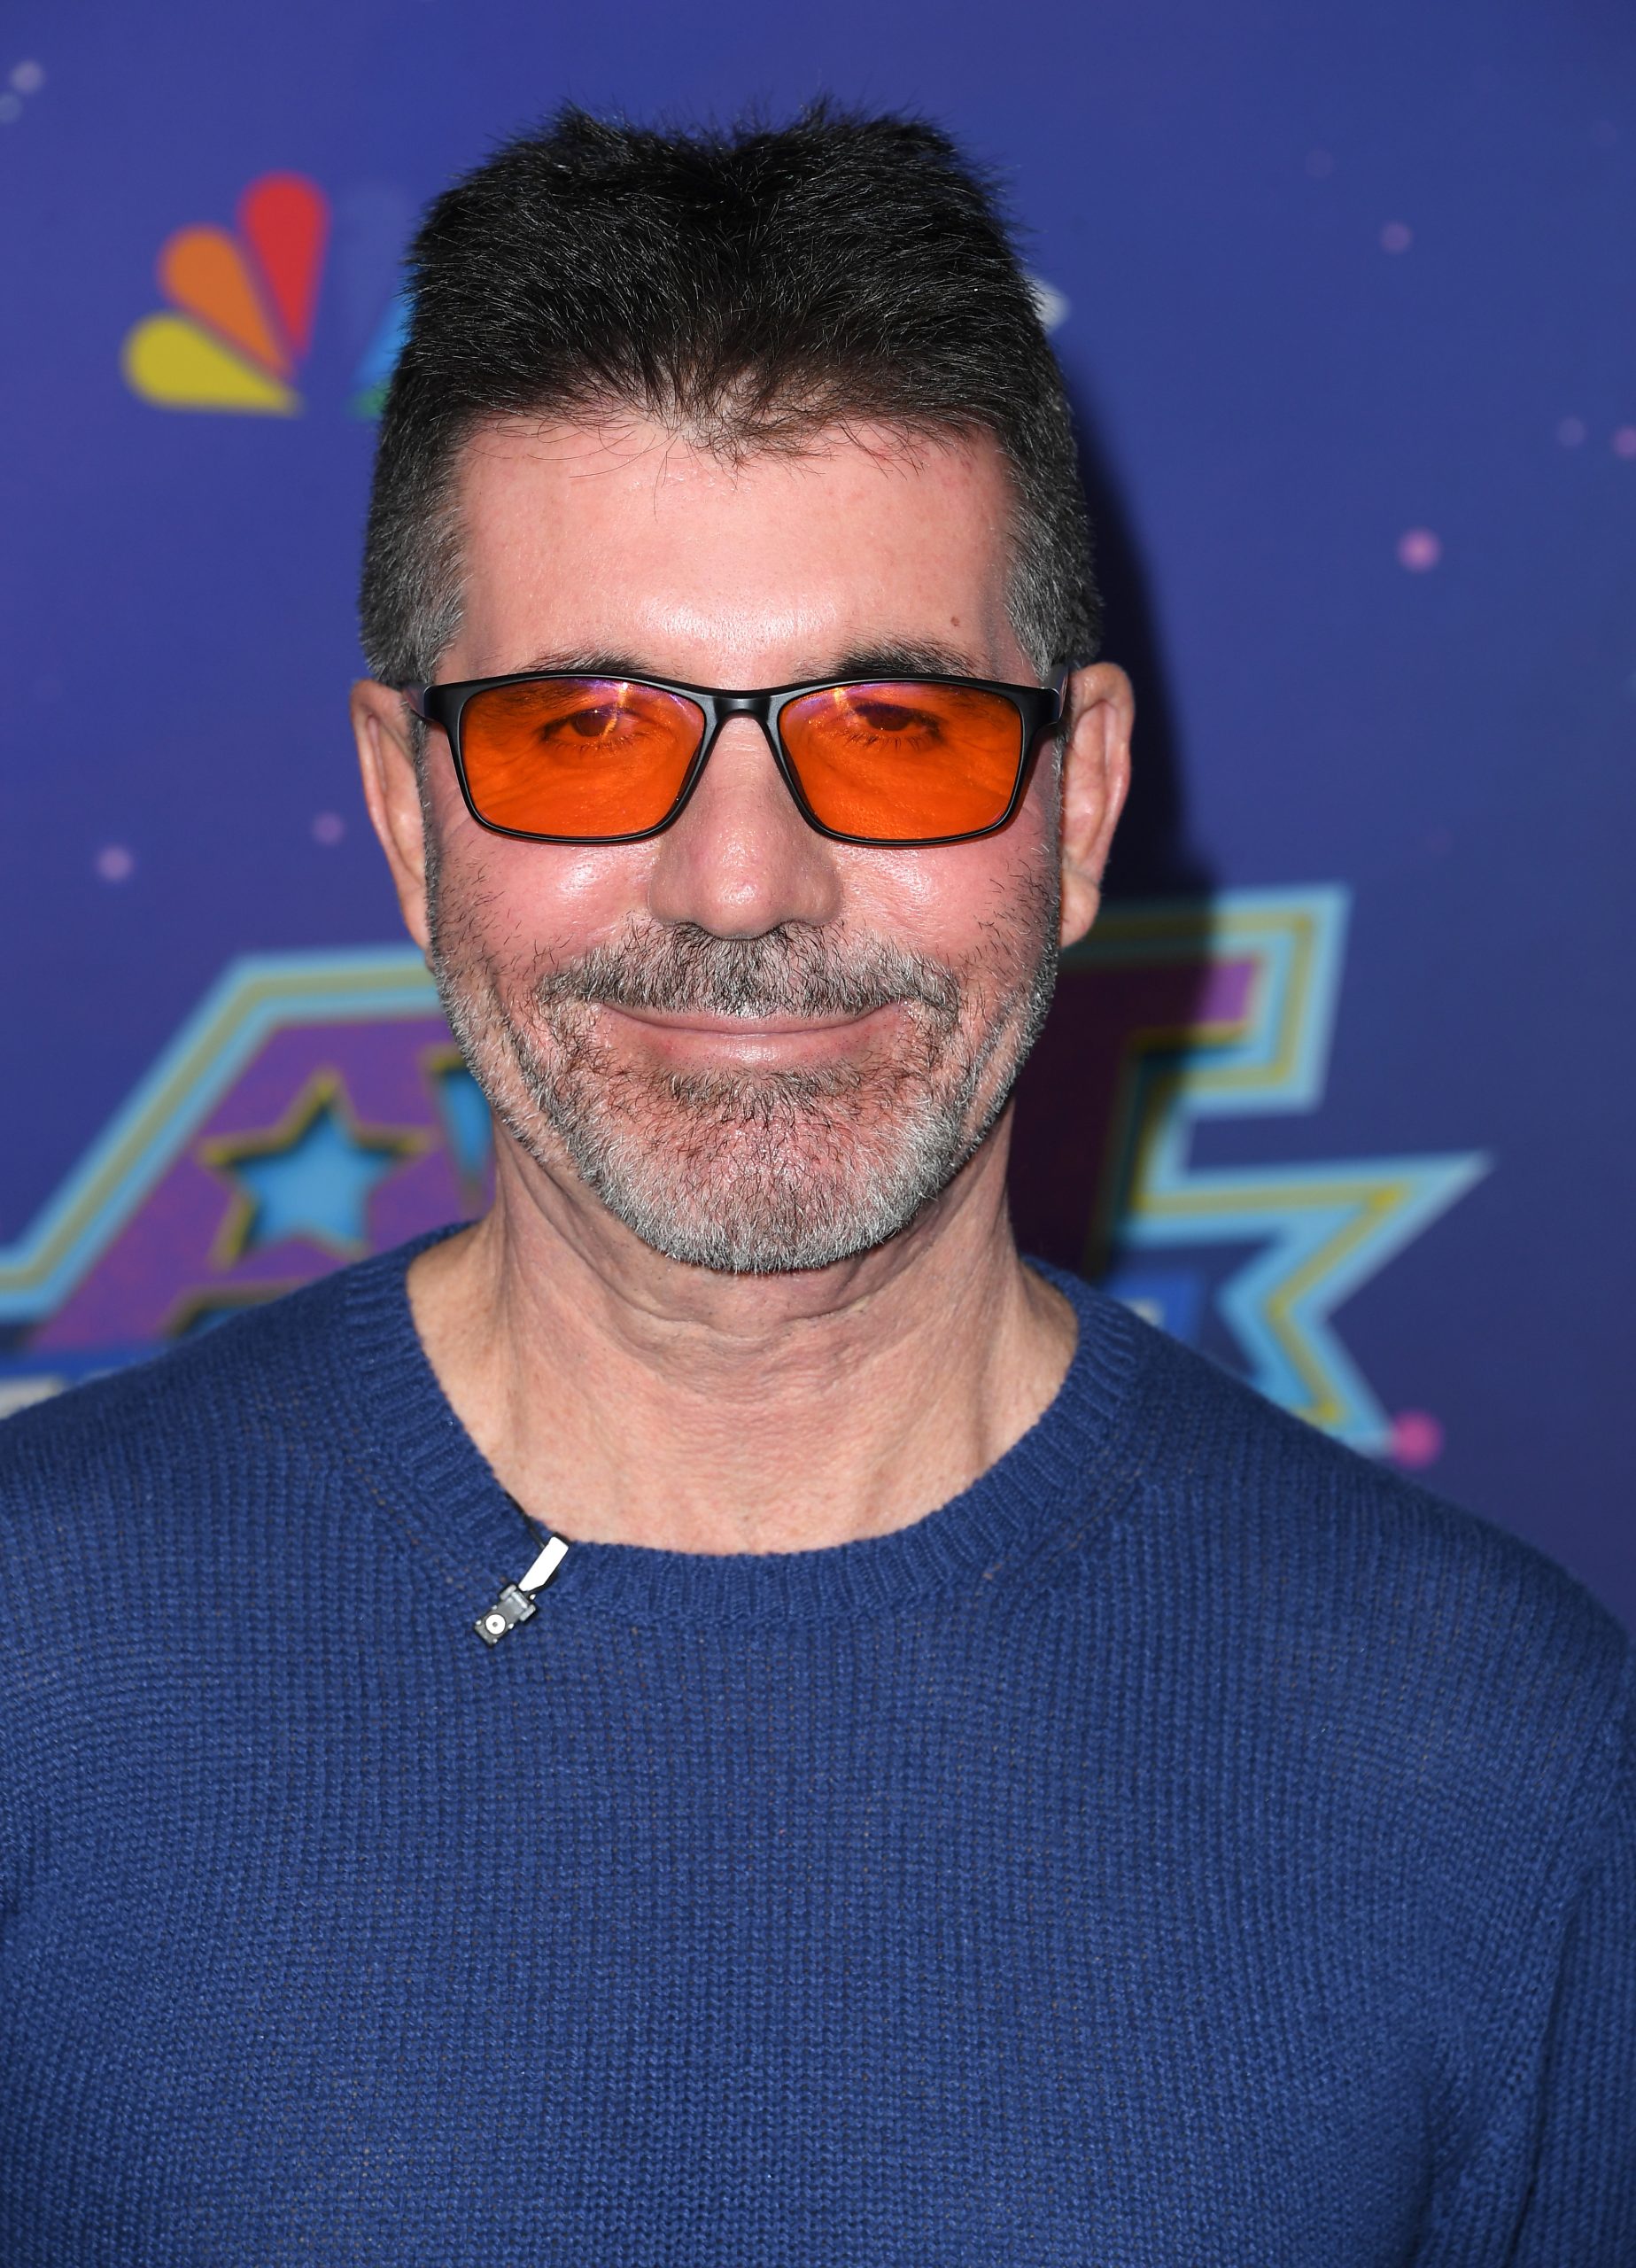 Simon Cowell reveals he only works four days a week – and four strict rules for work he never breaks